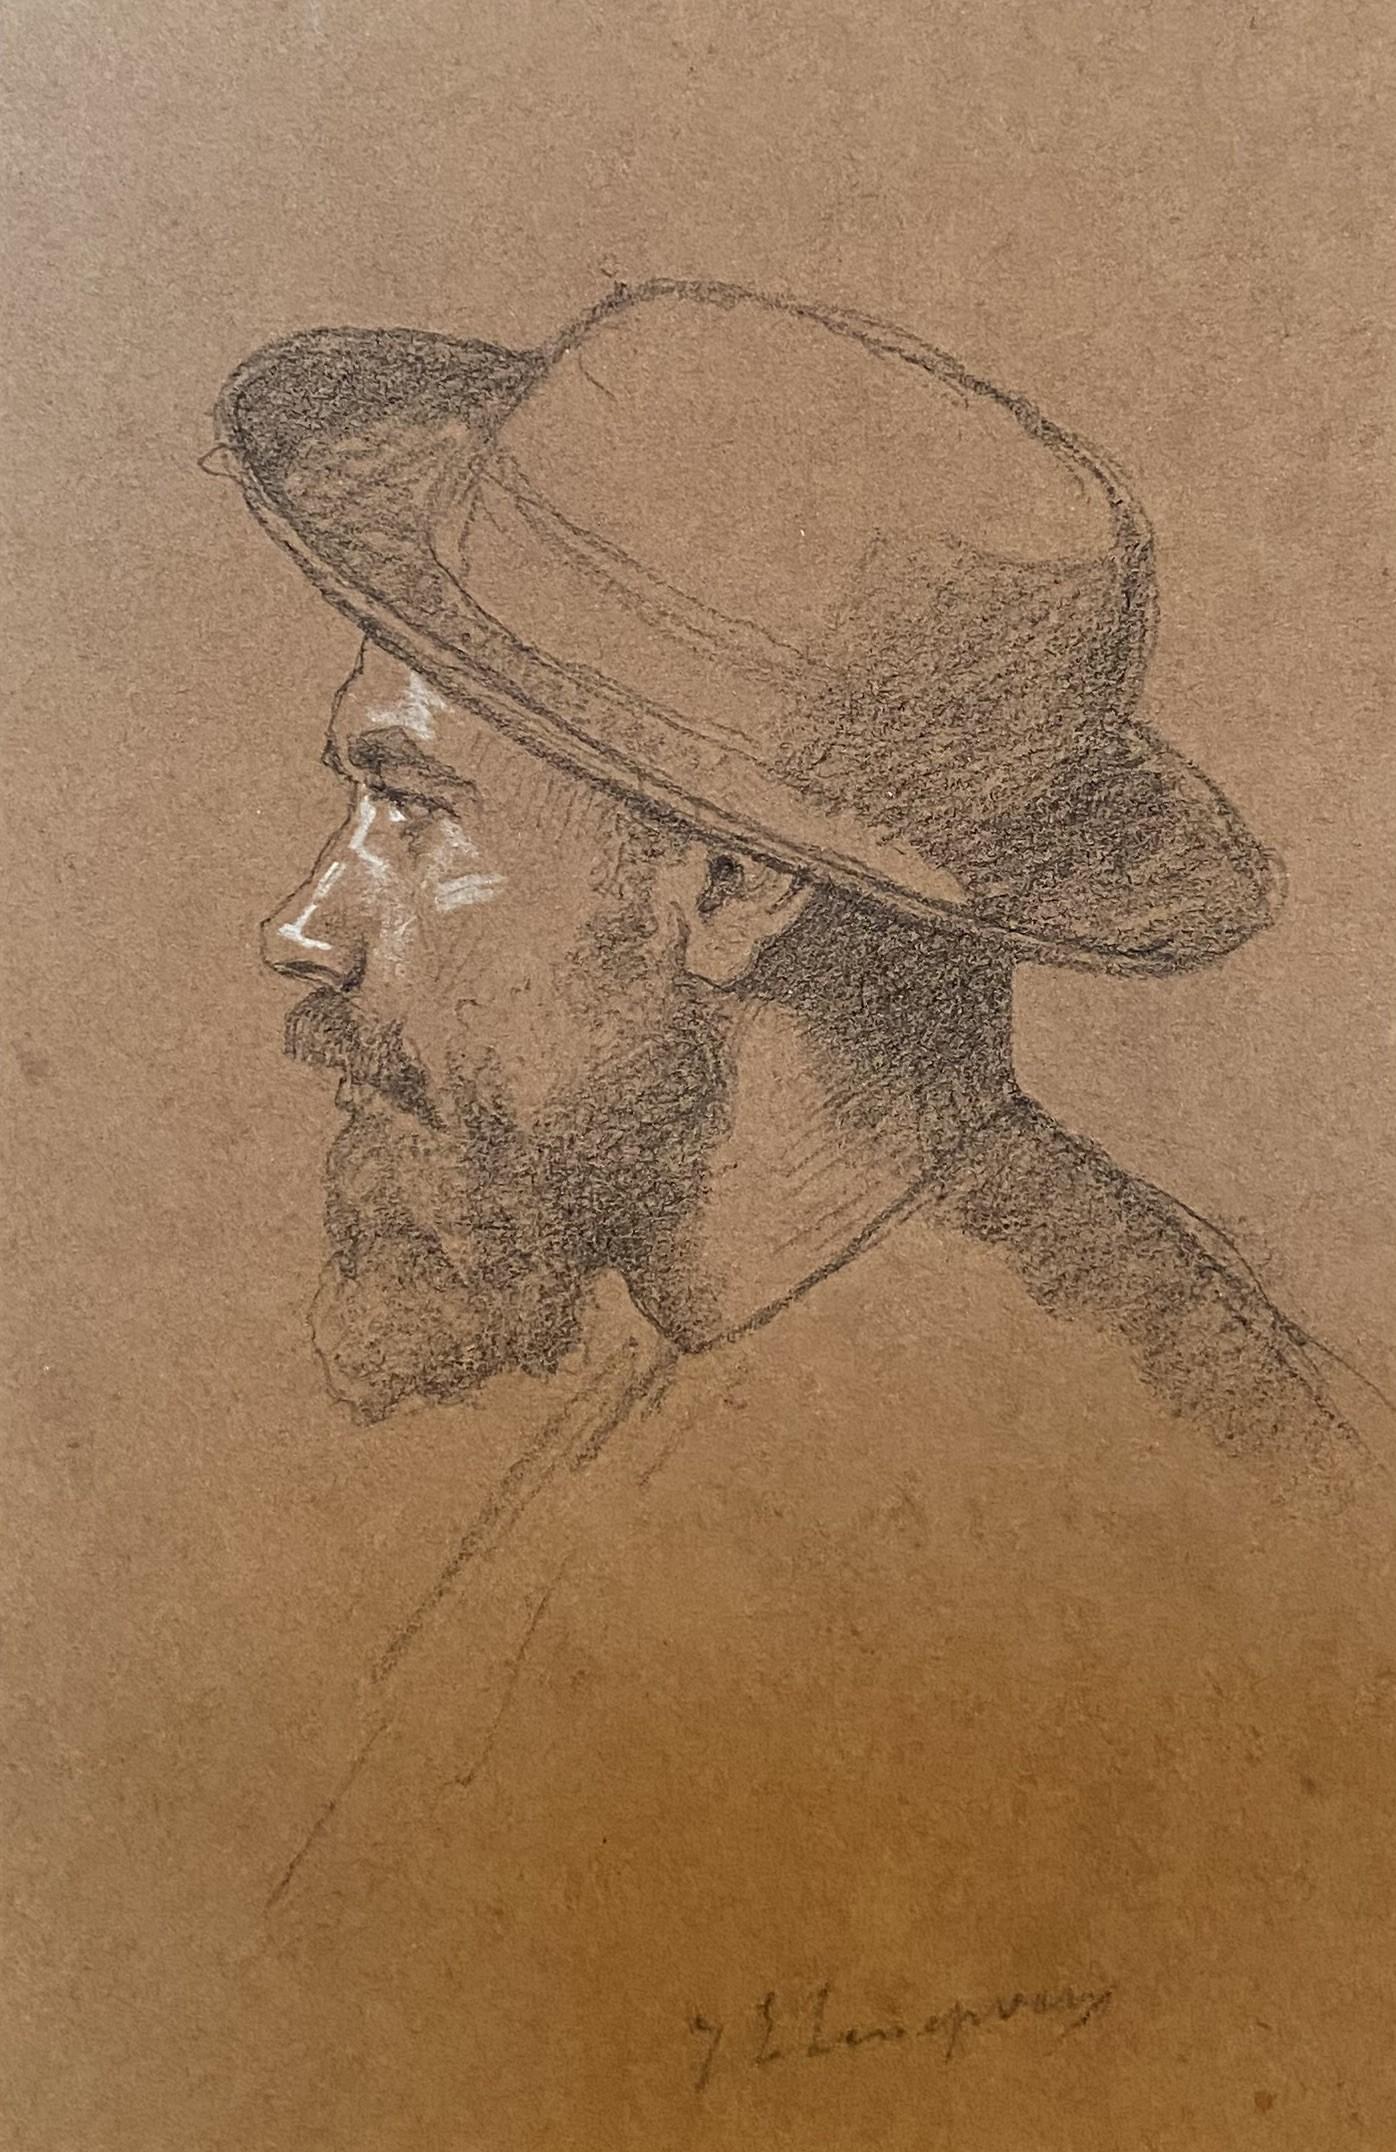 Jules-Eugène Lenepveu (1819-1898) 
Portrait of a man in profile
signed on the lower right
Pencil and heightenings of white gouache on paper
19.5 x 13 cm
Framed :  29 x 22.7 cm

Jules-Eugène Lenepveu is of course particularly well known for his